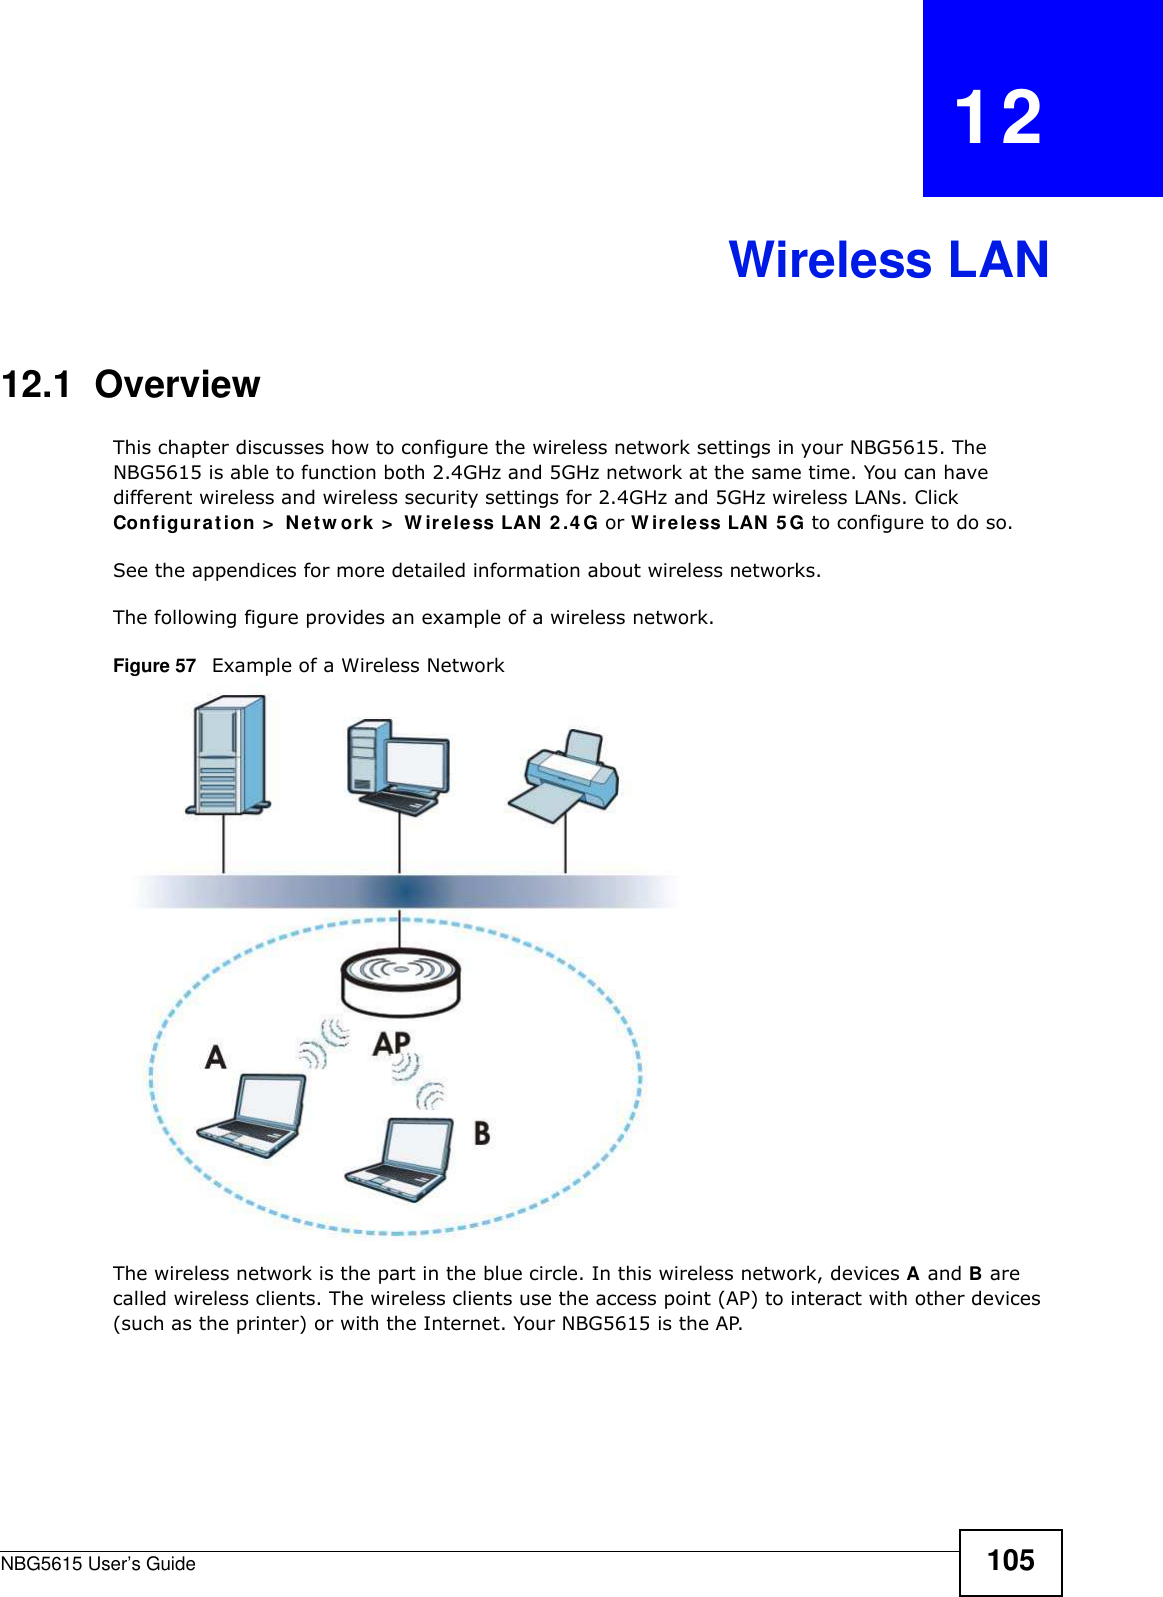 NBG5615 User’s Guide 105CHAPTER   12Wireless LAN12.1  OverviewThis chapter discusses how to configure the wireless network settings in your NBG5615. The NBG5615 is able to function both 2.4GHz and 5GHz network at the same time. You can have different wireless and wireless security settings for 2.4GHz and 5GHz wireless LANs. Click Configuration &gt;  Netw ork &gt;  W ireless LAN 2.4G or W ireless LAN 5G to configure to do so.See the appendices for more detailed information about wireless networks.The following figure provides an example of a wireless network.Figure 57   Example of a Wireless NetworkThe wireless network is the part in the blue circle. In this wireless network, devices A and B are called wireless clients. The wireless clients use the access point (AP) to interact with other devices (such as the printer) or with the Internet. Your NBG5615 is the AP.